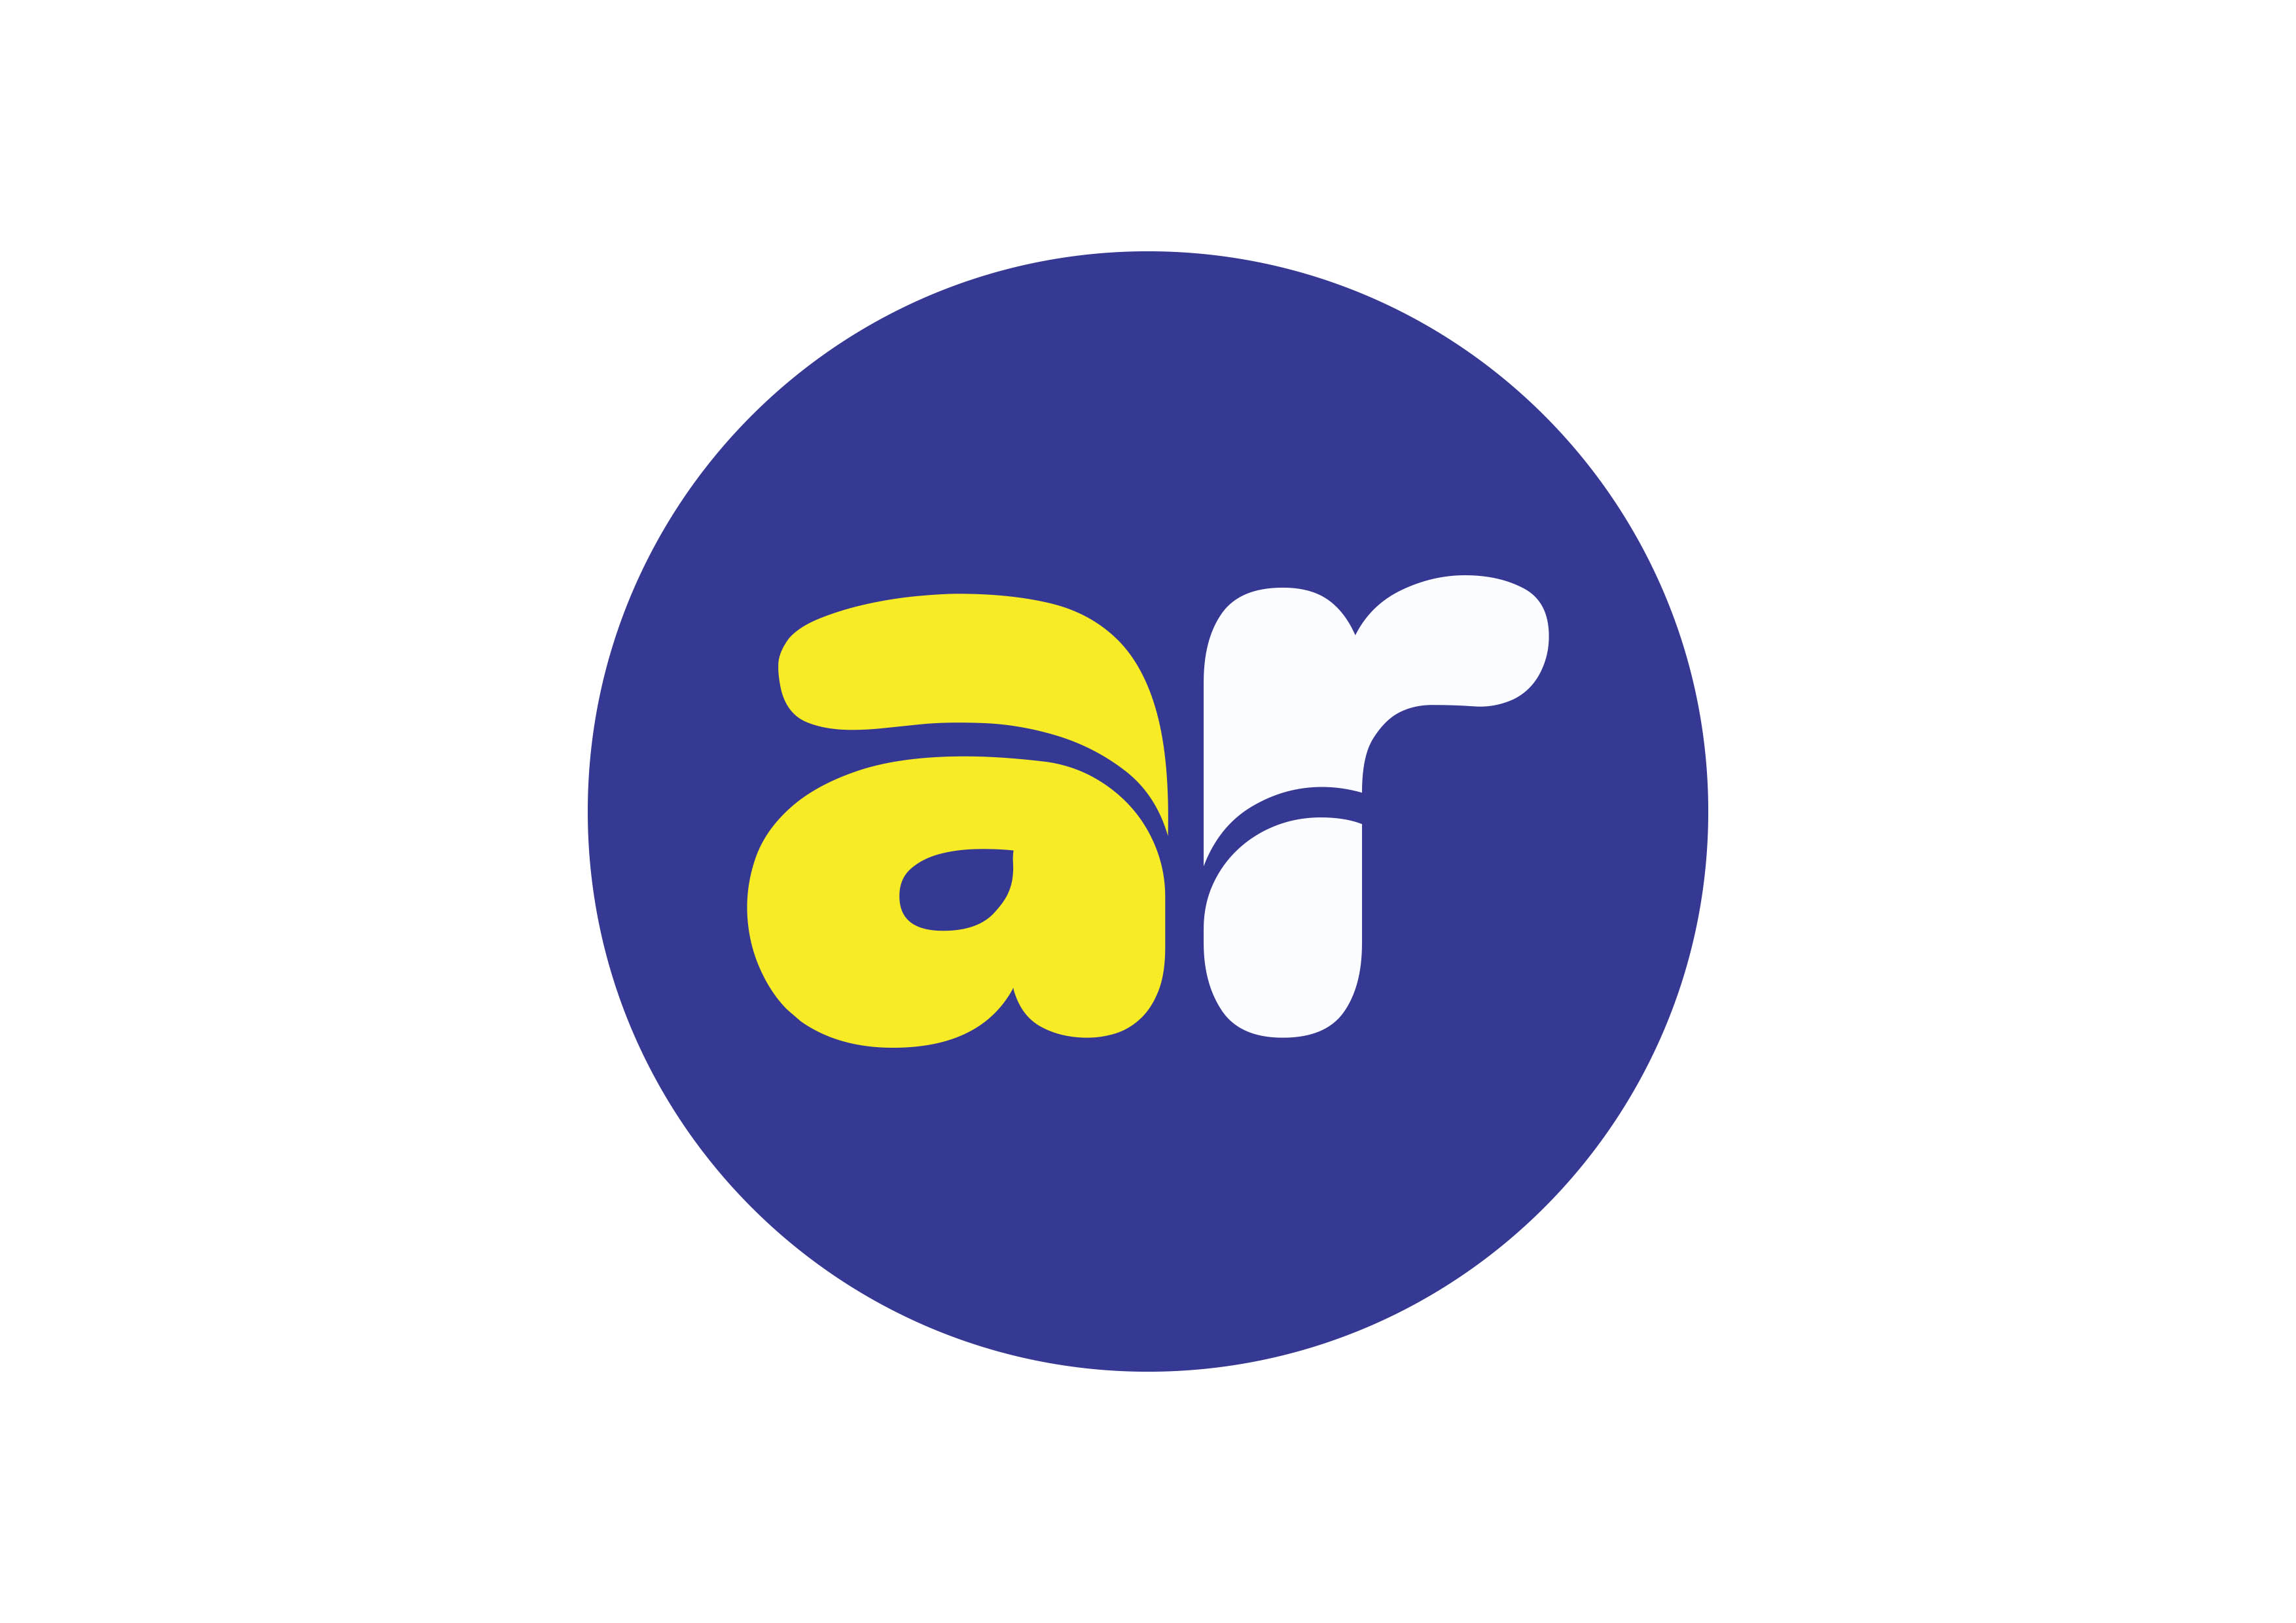 Blue and yellow logo with the letter a in the middle.